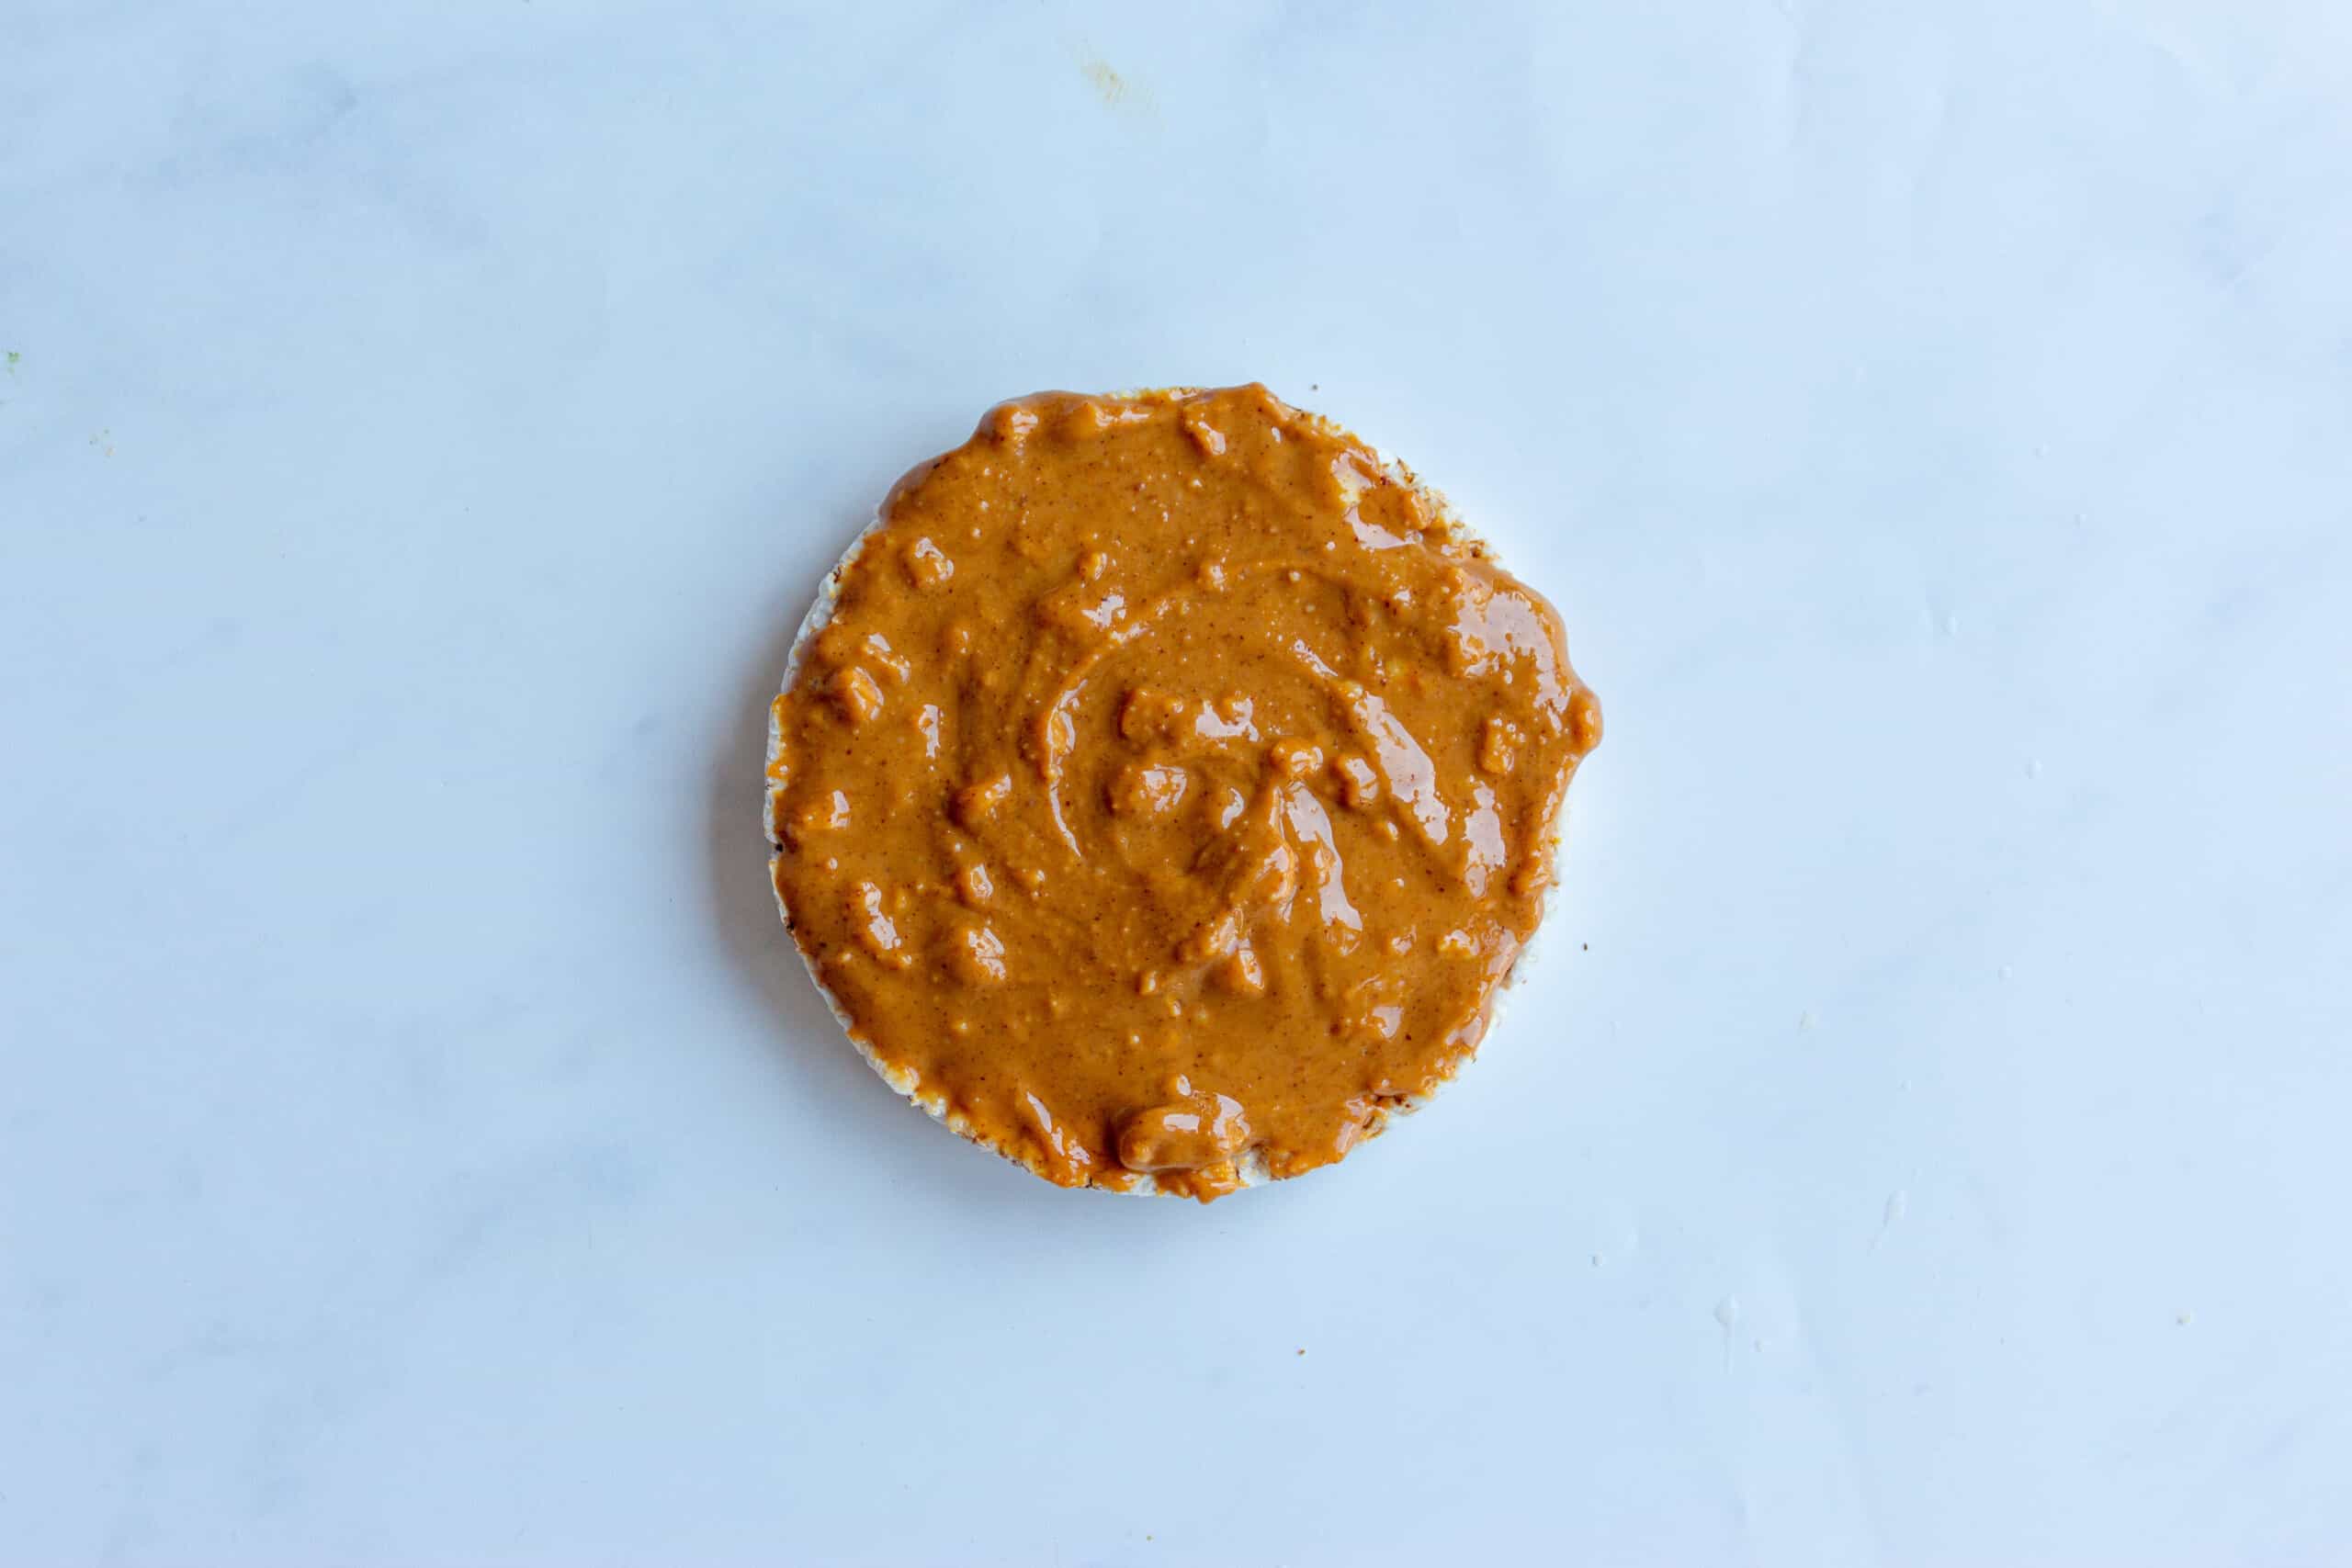 Peanut butter spread over the plain rice cake on pale white background.